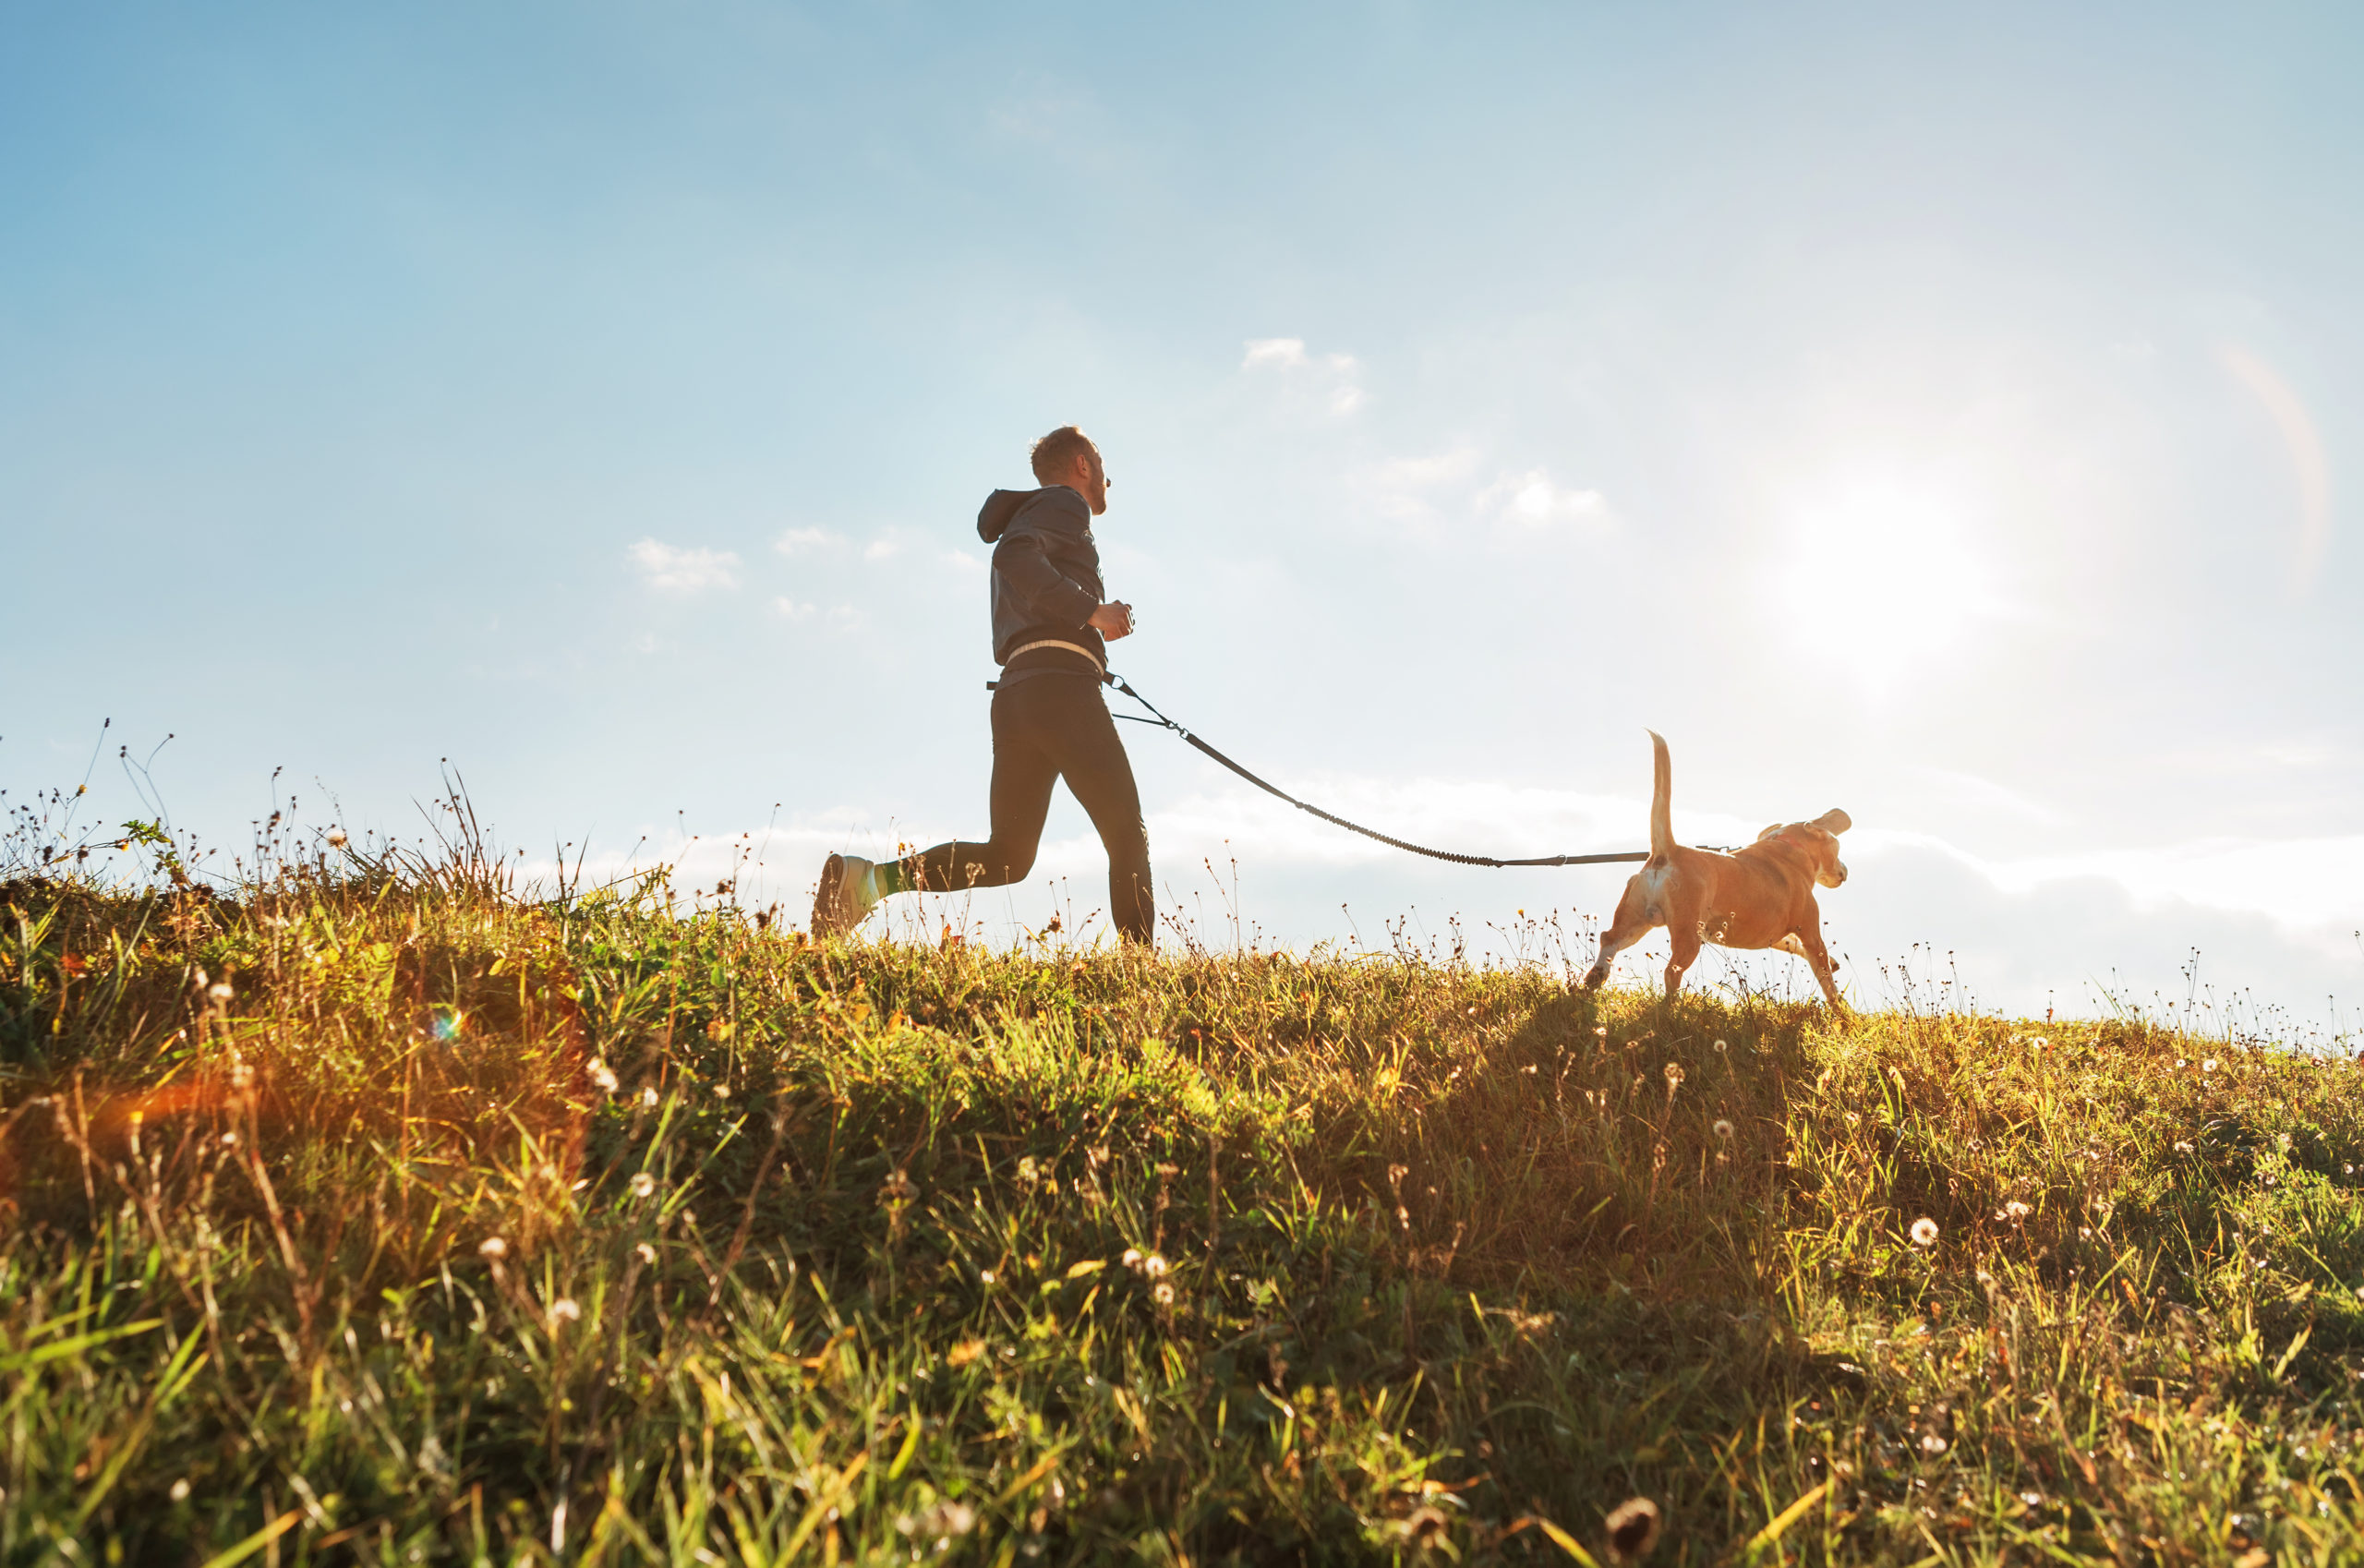 A great way to manage the stress of running your private practice is through exercise or spending time with your pets.